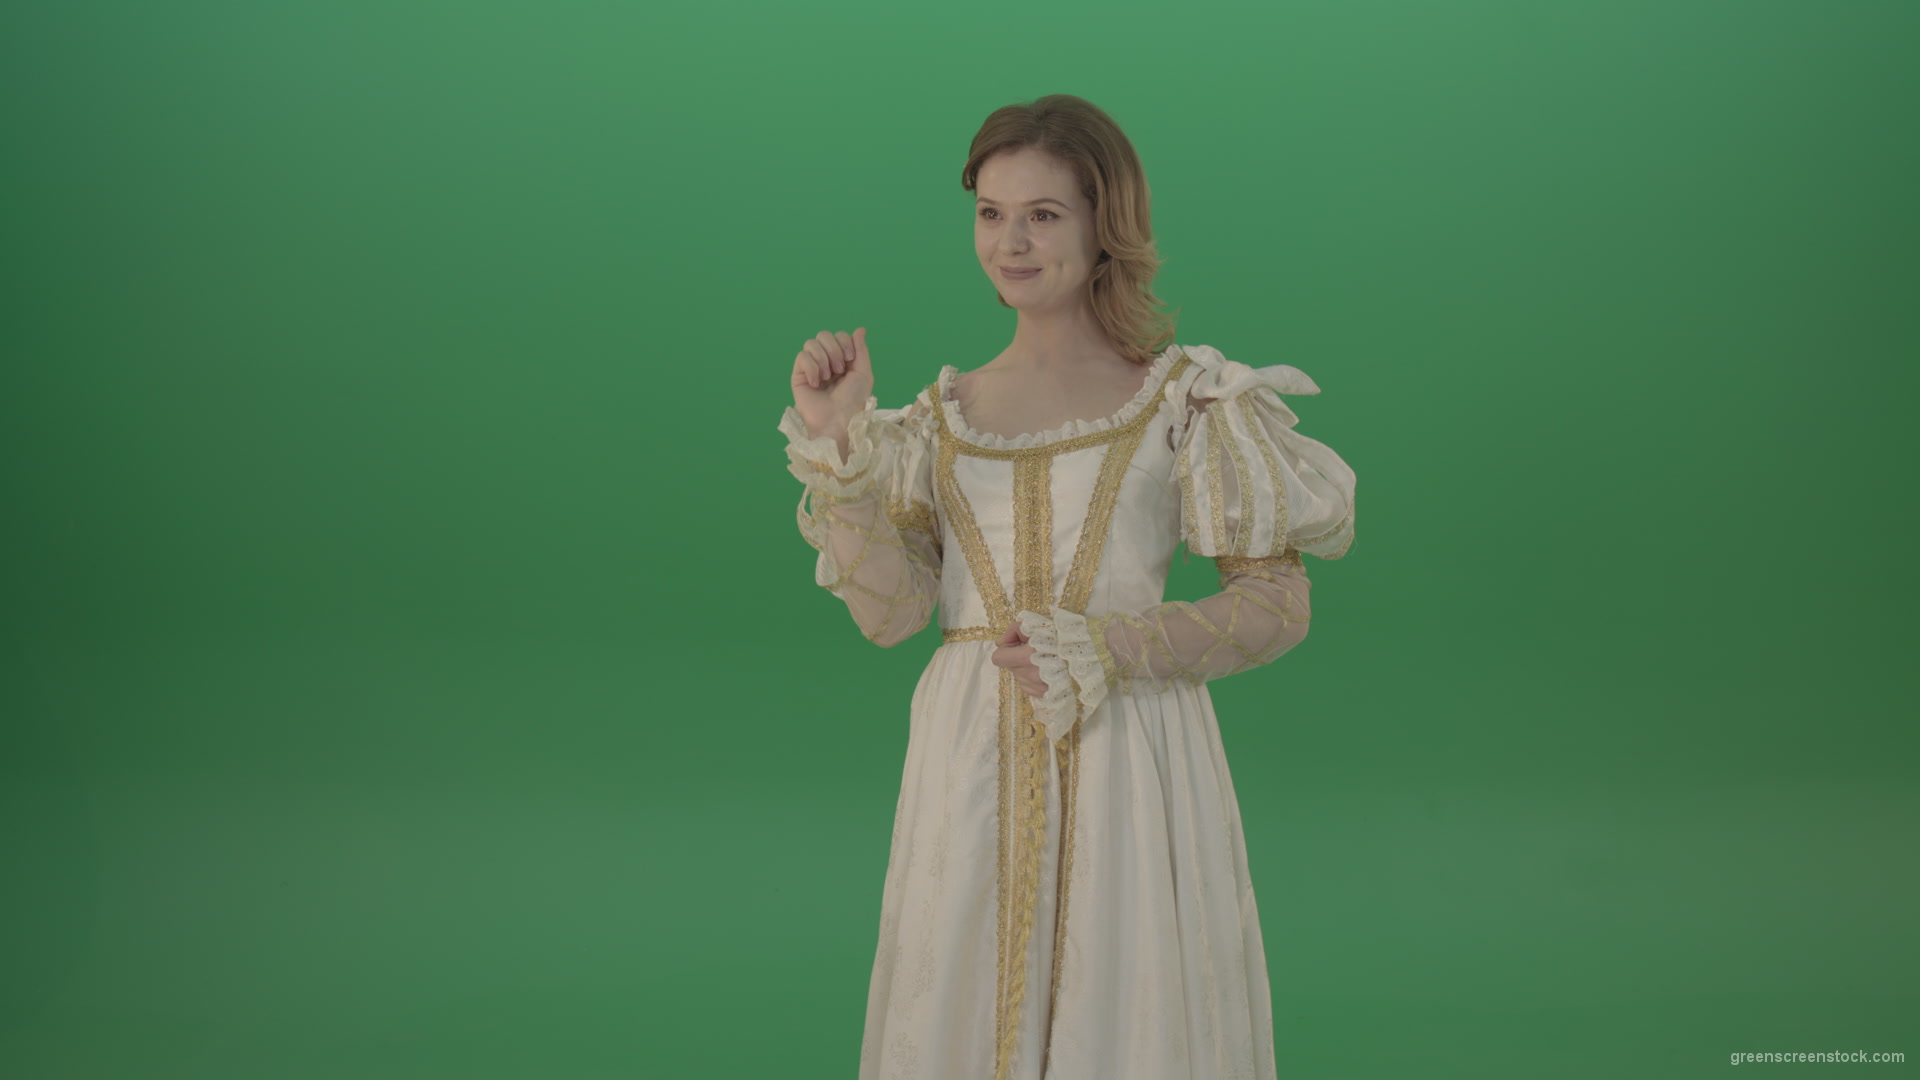 Girl-flips-a-virtual-screen-dressed-in-a-medieval-costume-isolated-on-green-screen_008 Green Screen Stock